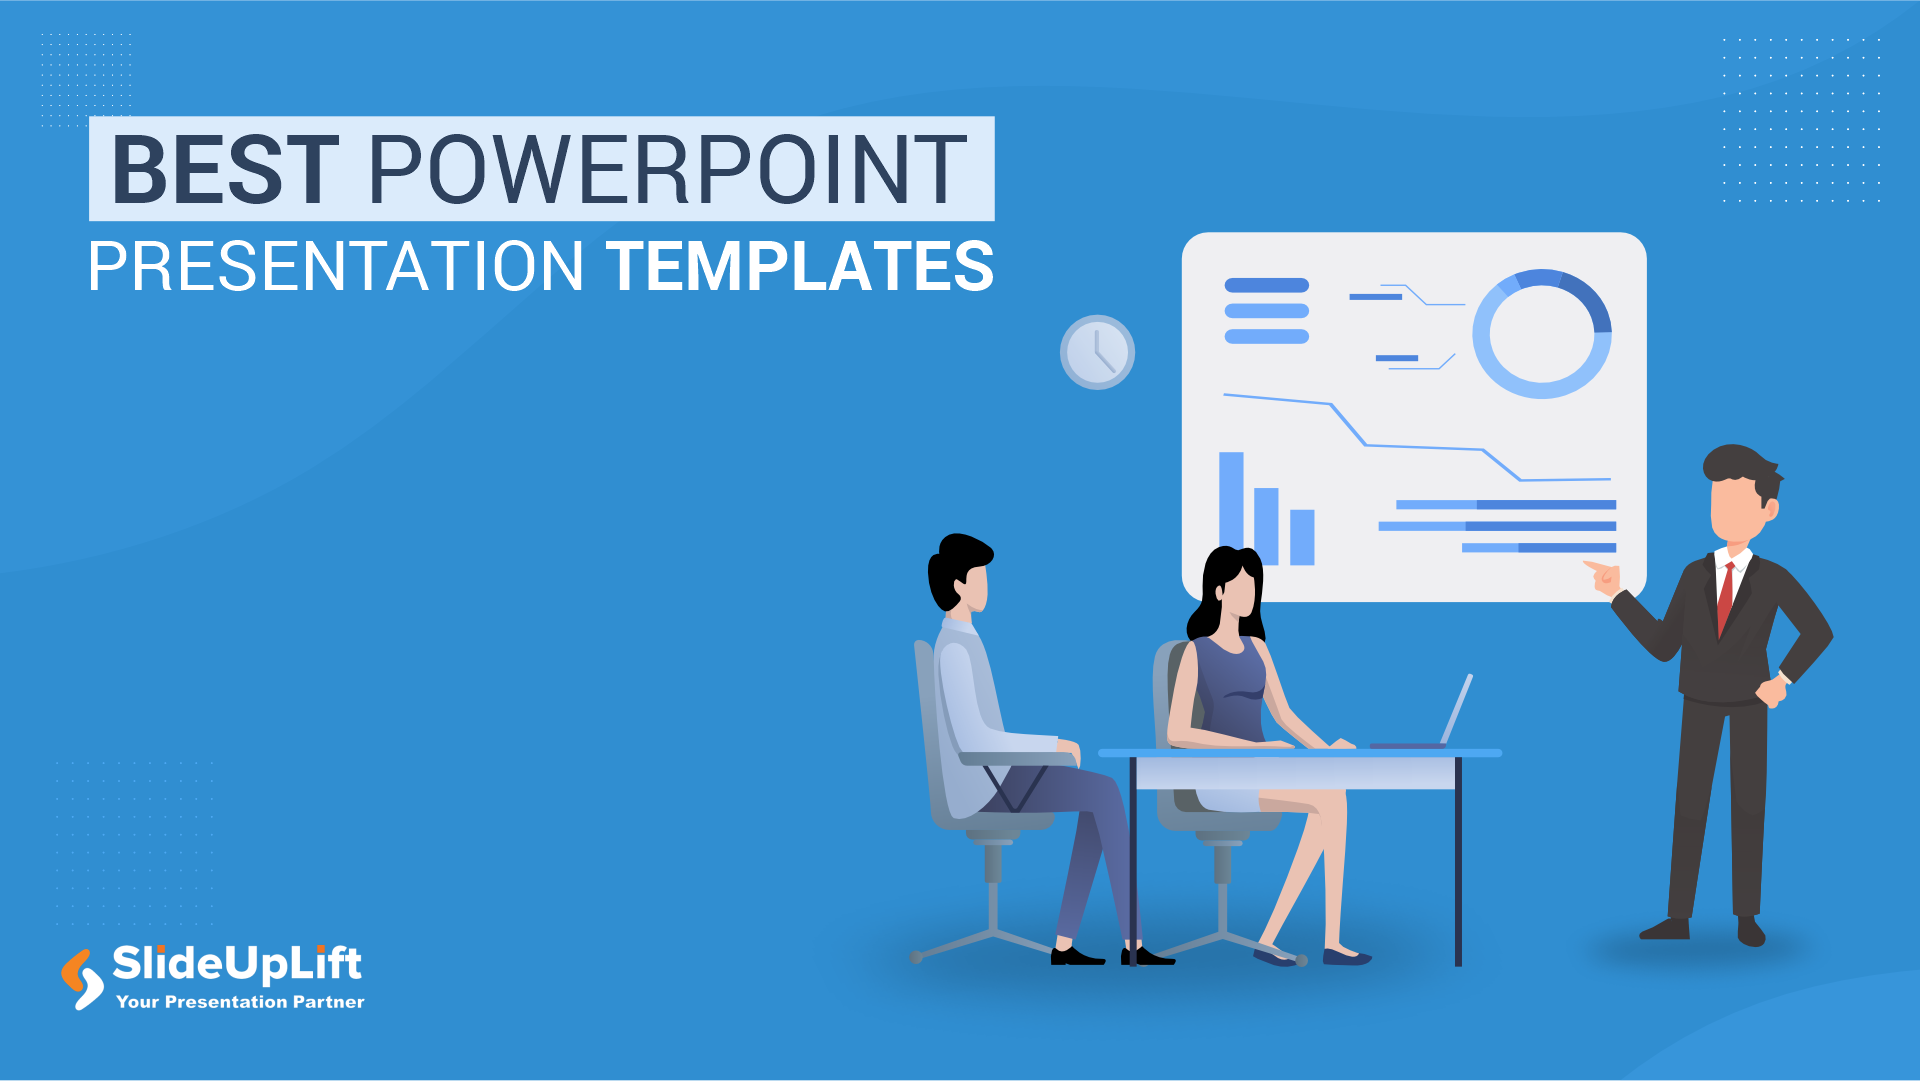 10 Best PowerPoint Templates for Presentations